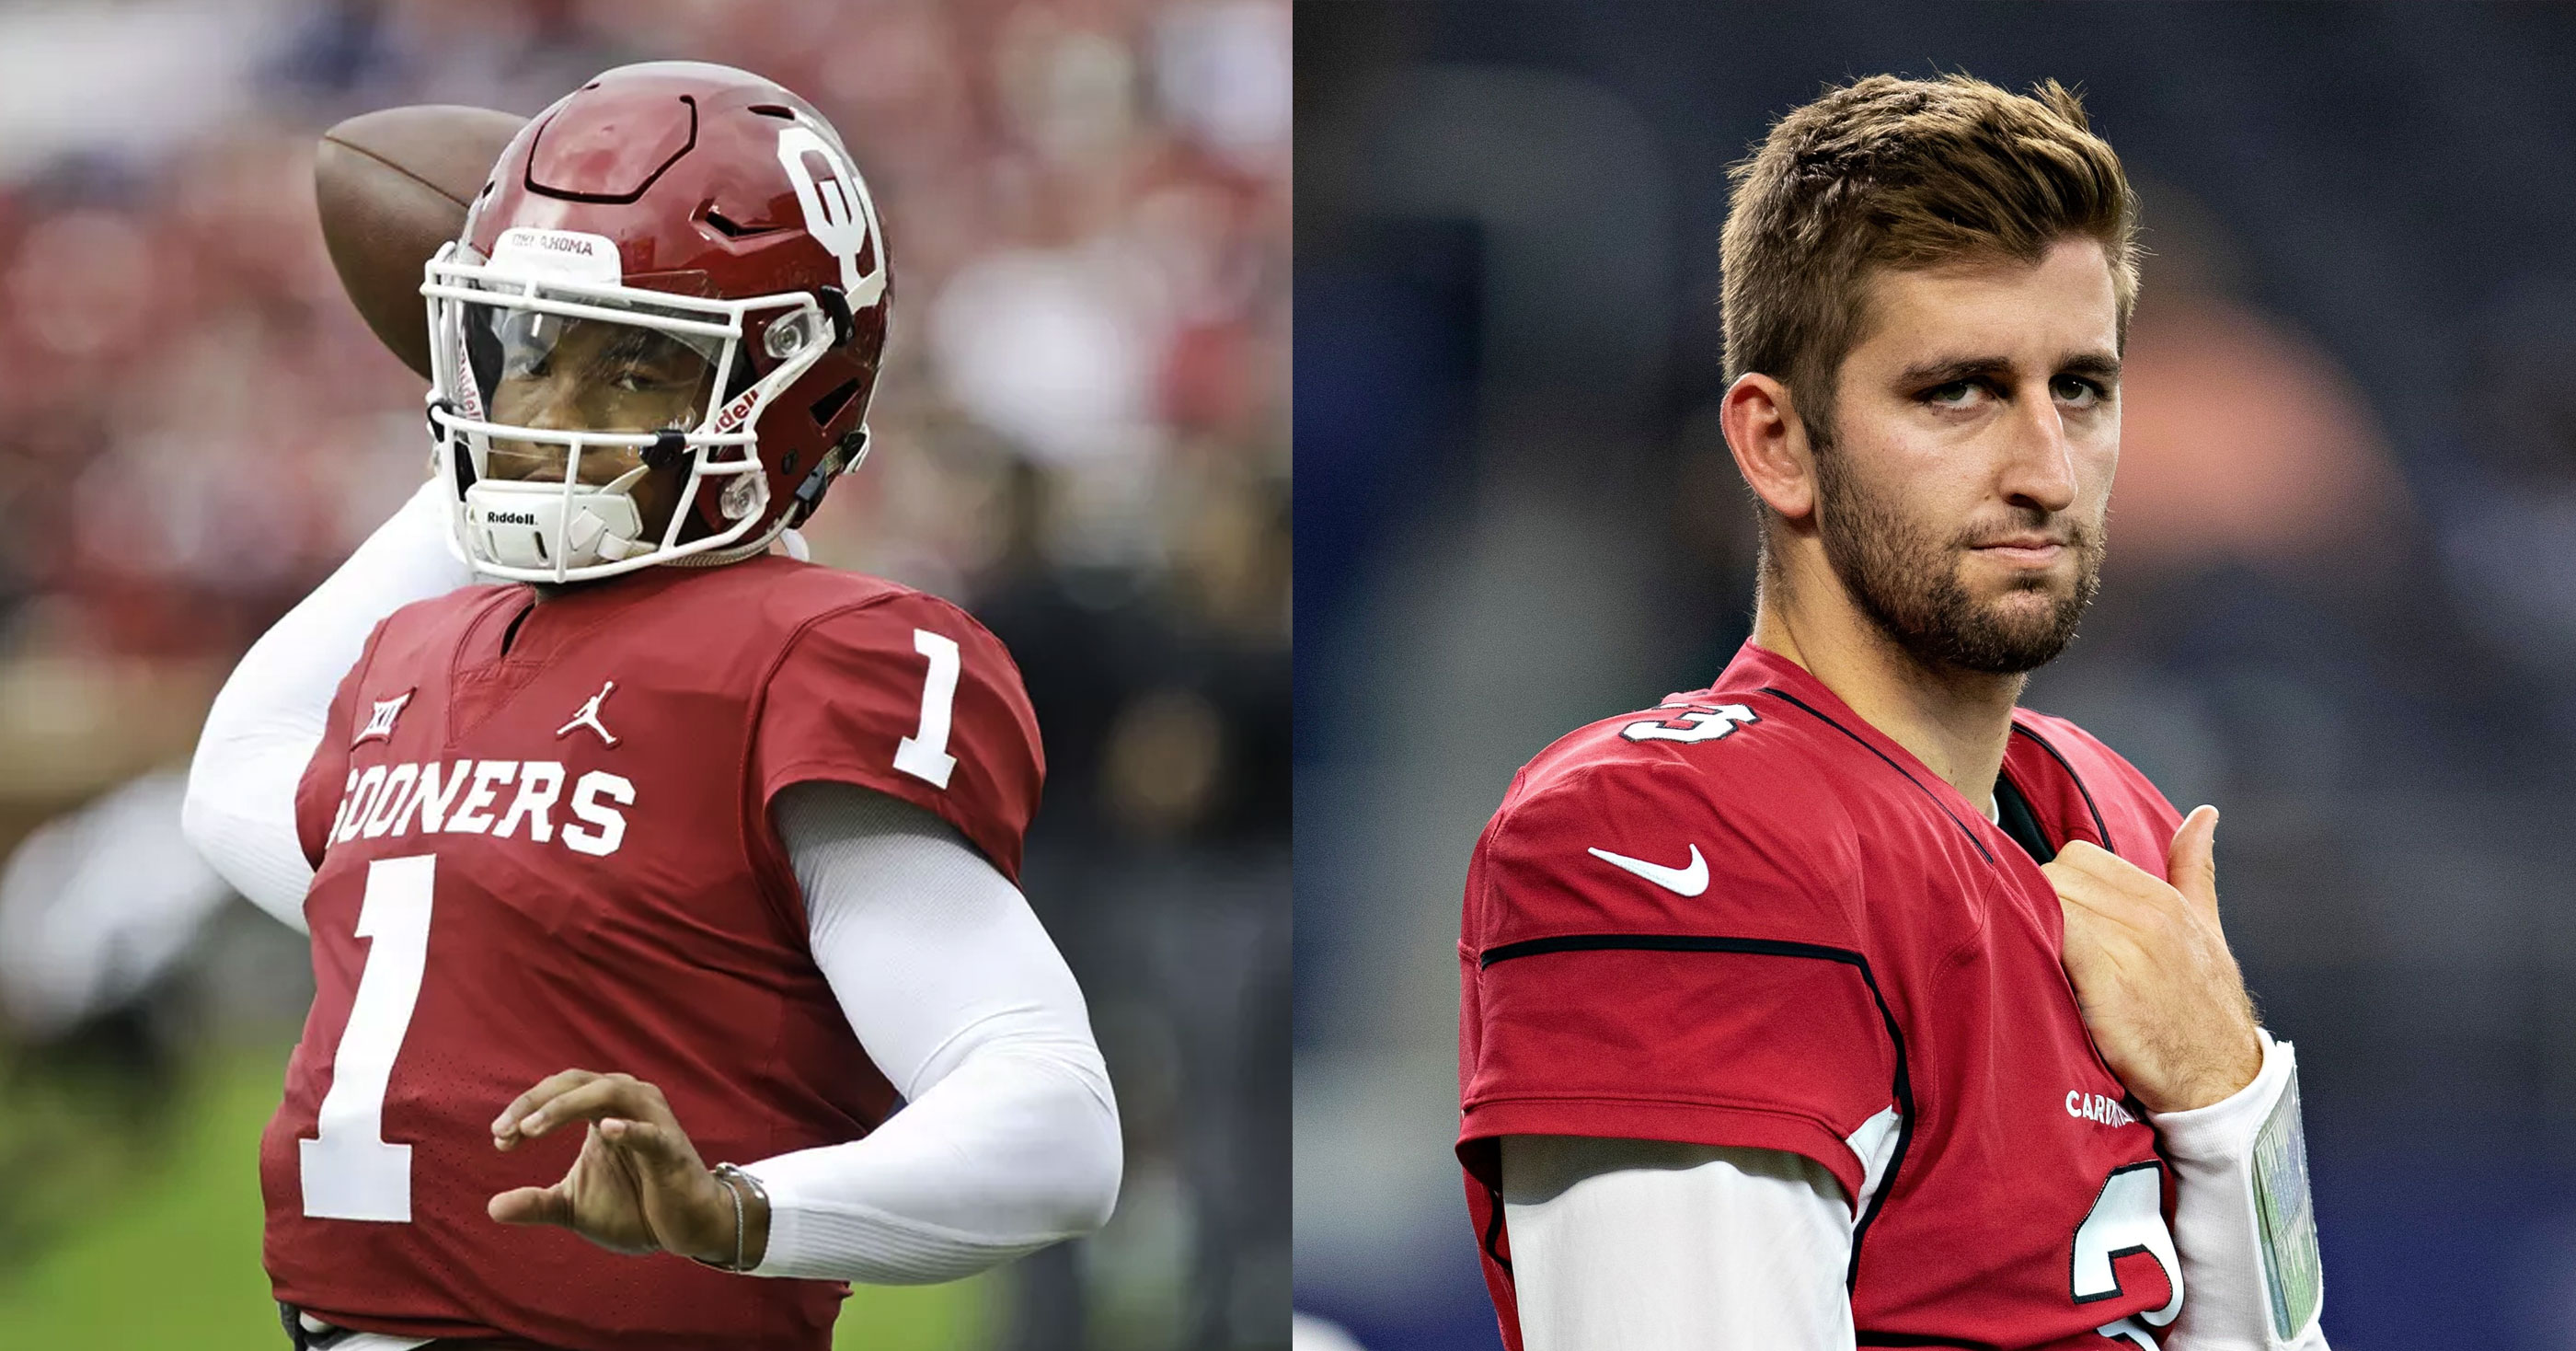 Kliff Kingsbury and Cardinals Could Reportedly Draft Kyler Murray #1 Overall, Trade Josh Rosen pic